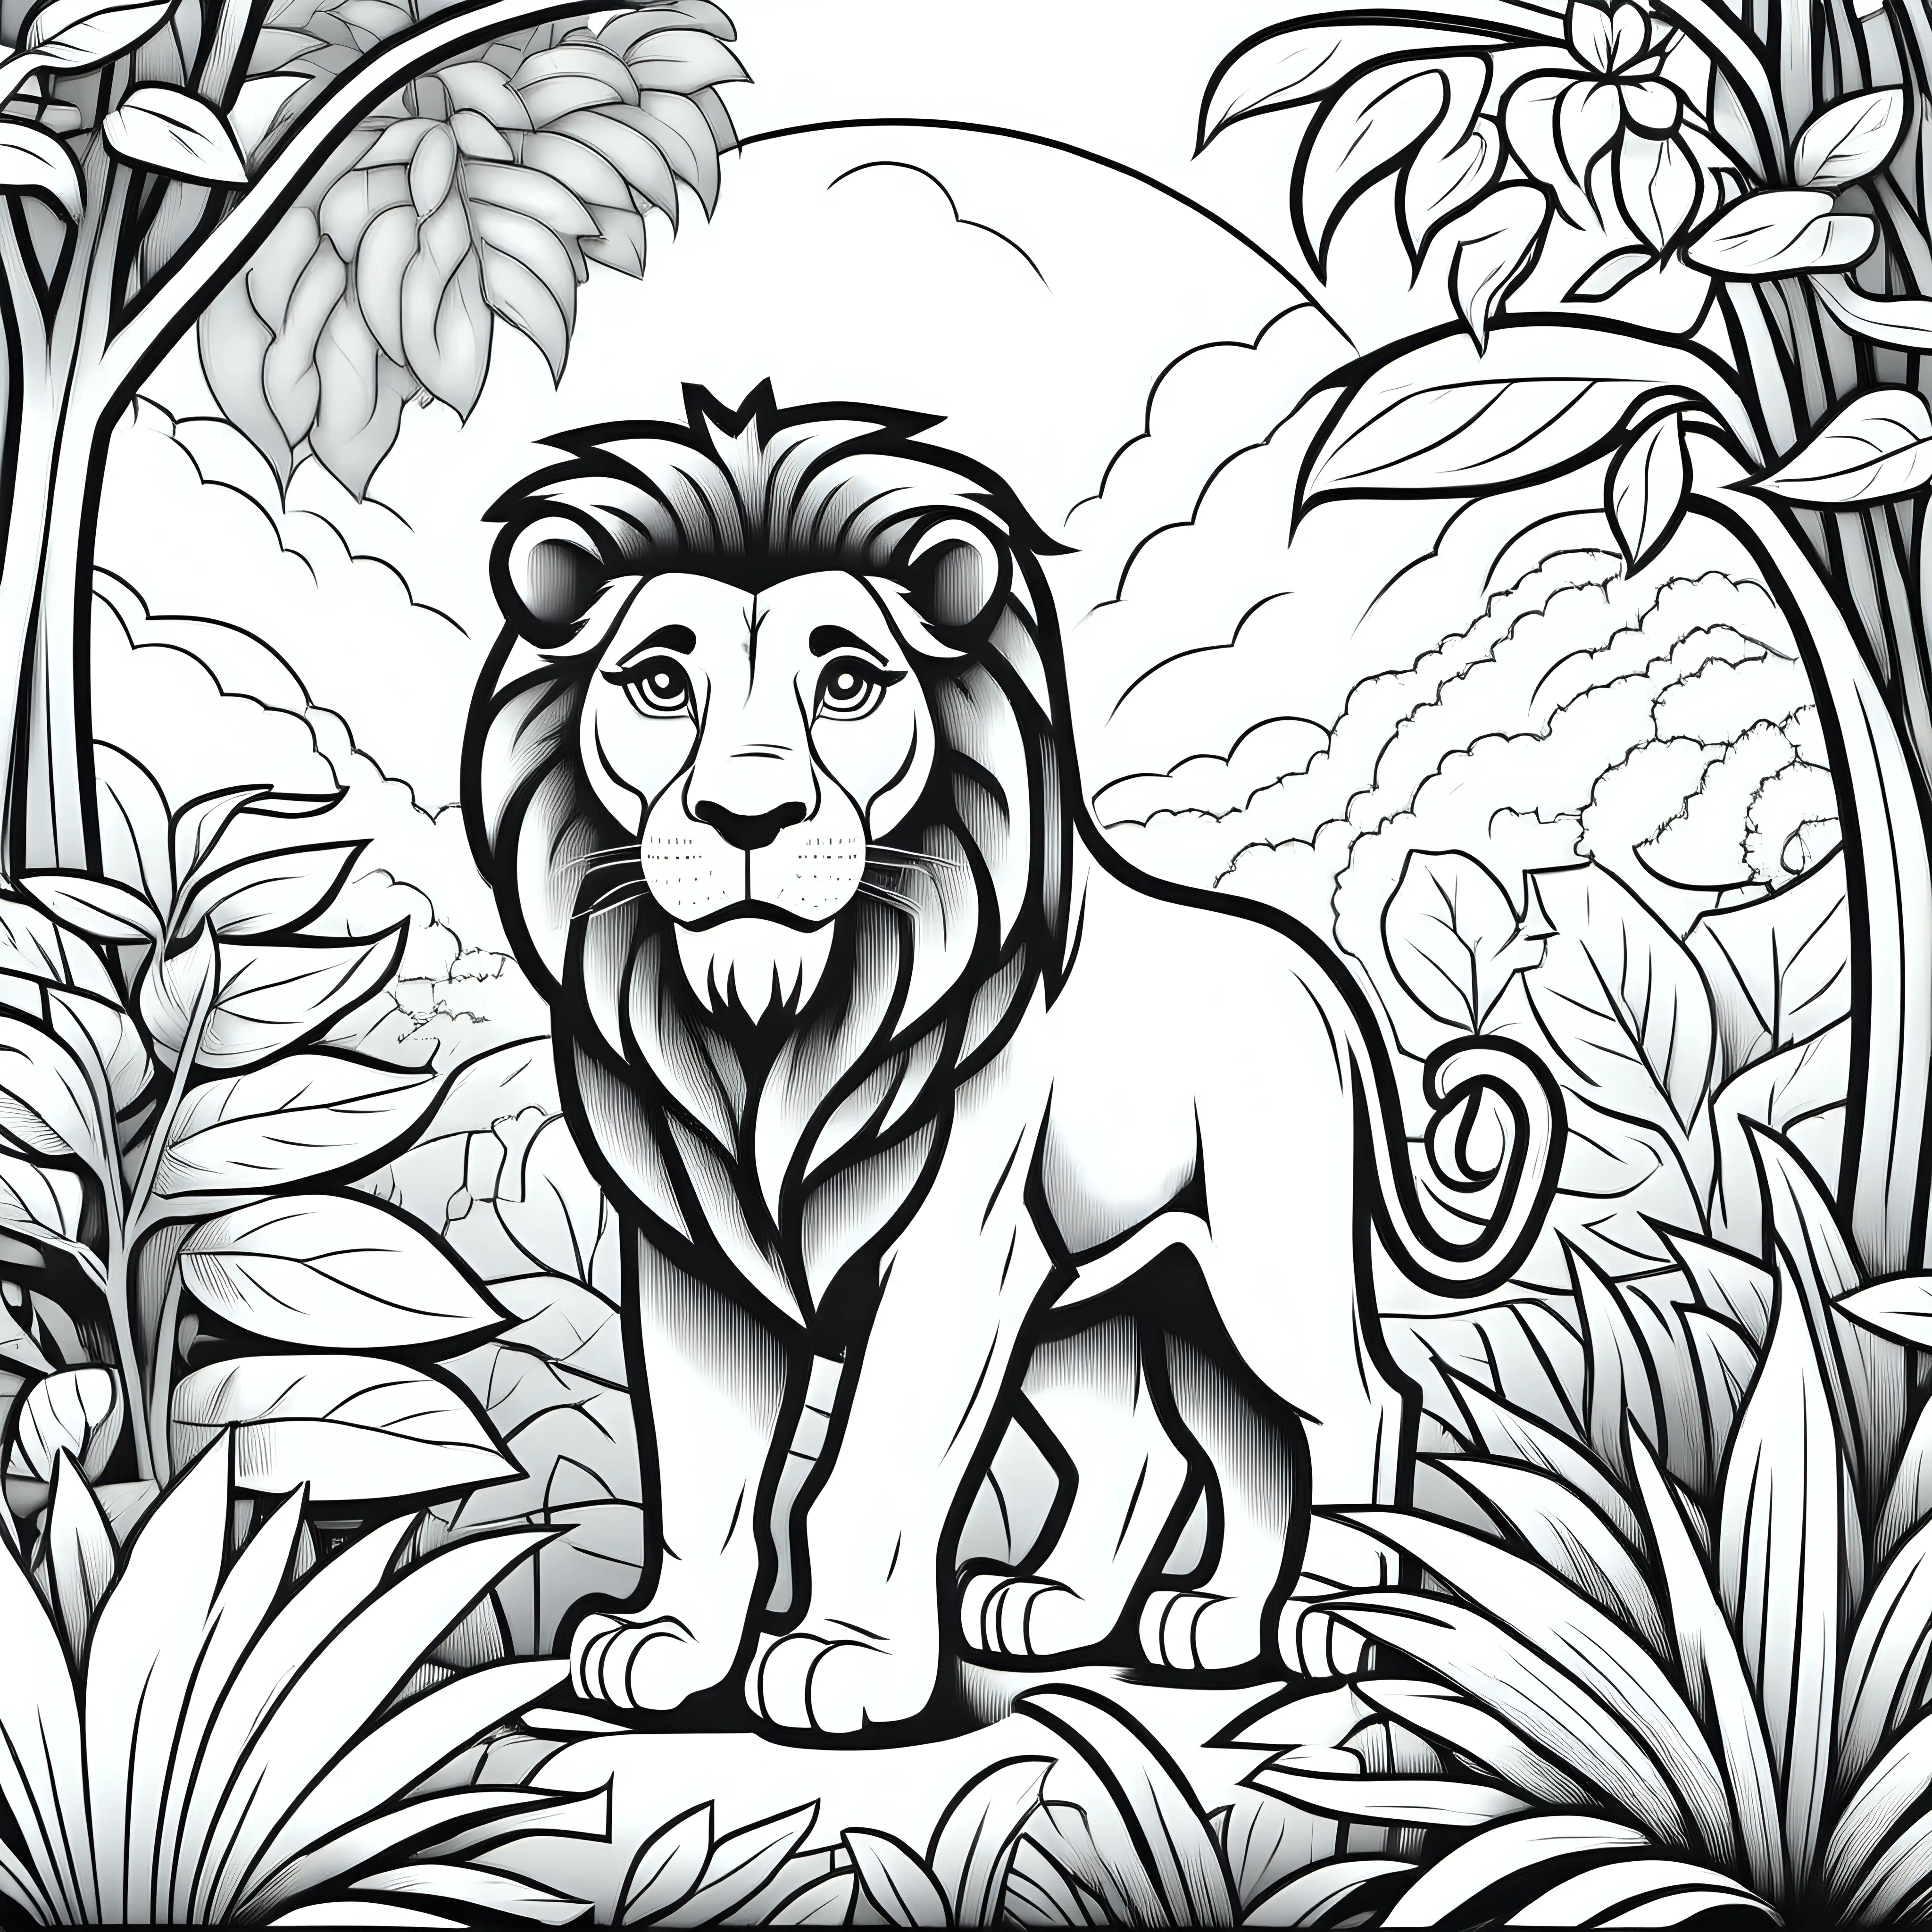 Lion in Garden of Eden Coloring Page for Kids